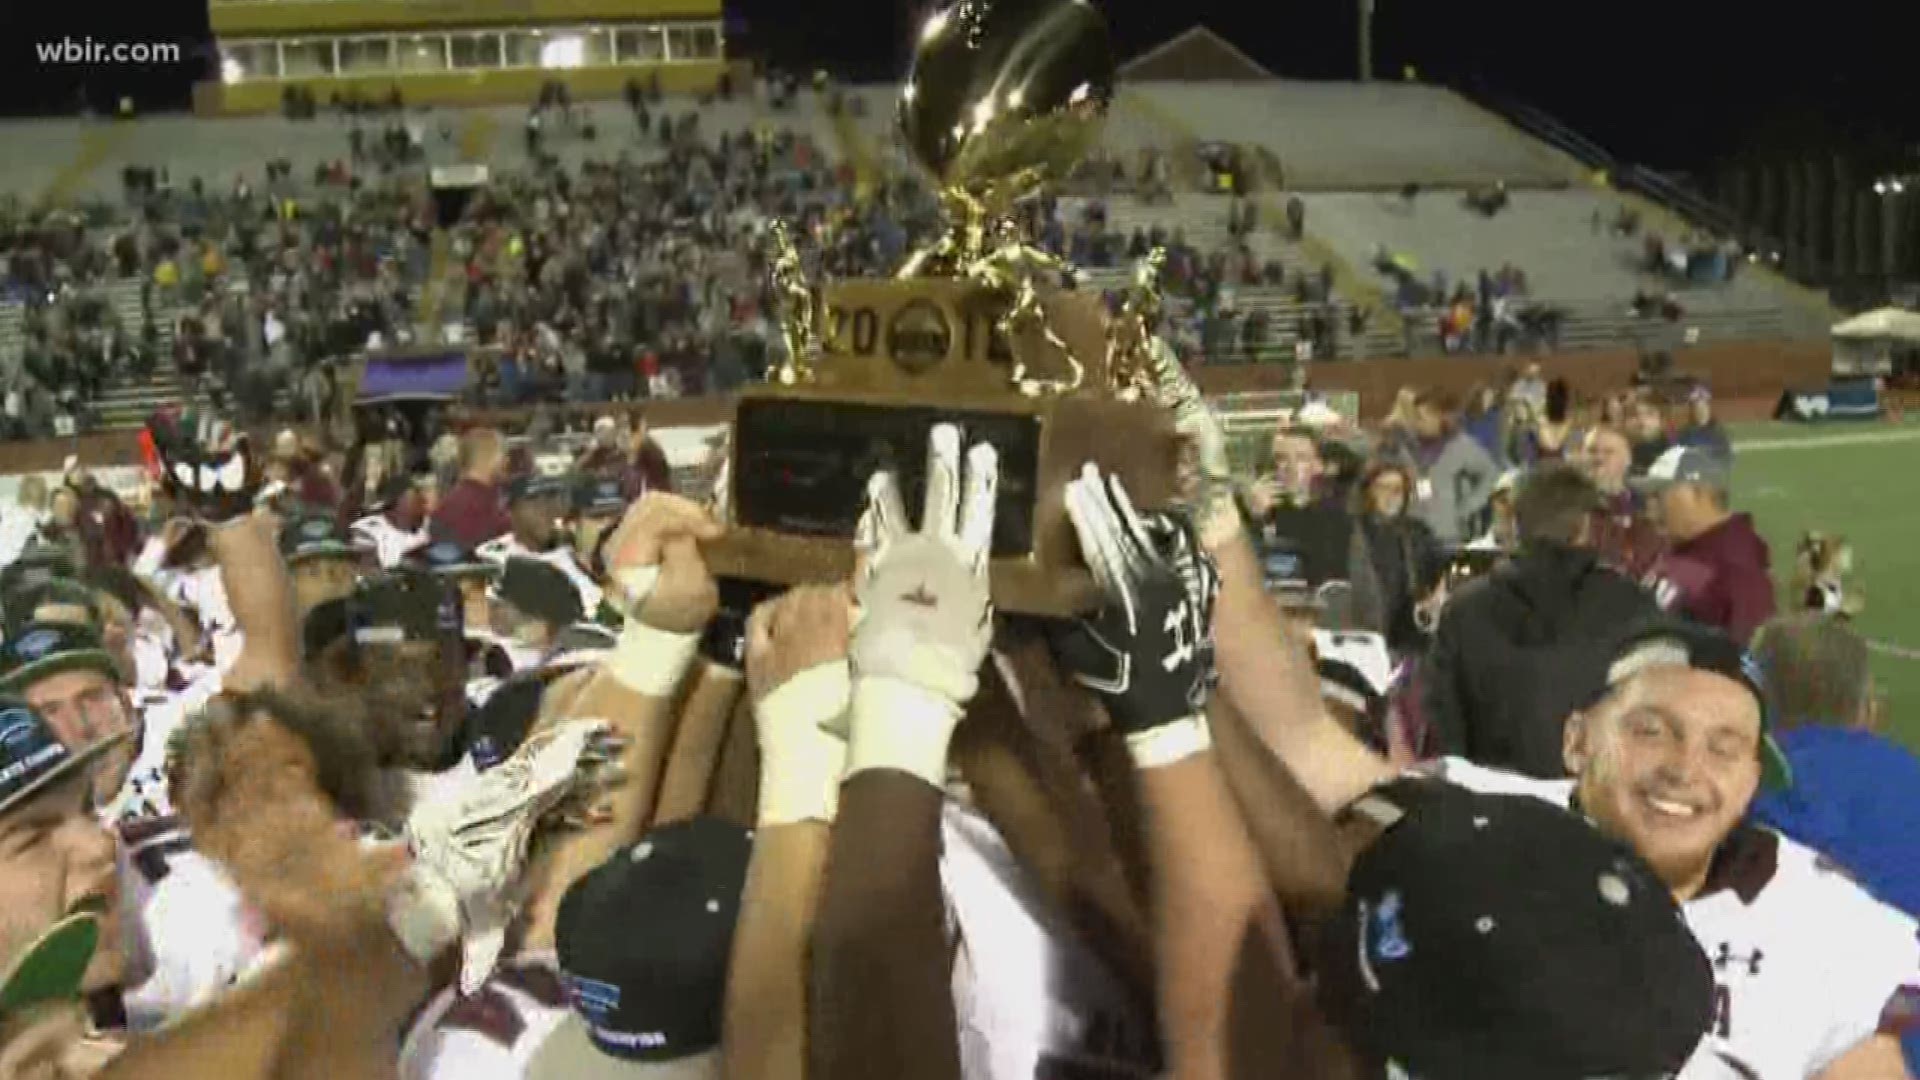 Highlights from the Tornadoes record-setting 17th TSSAA state title.